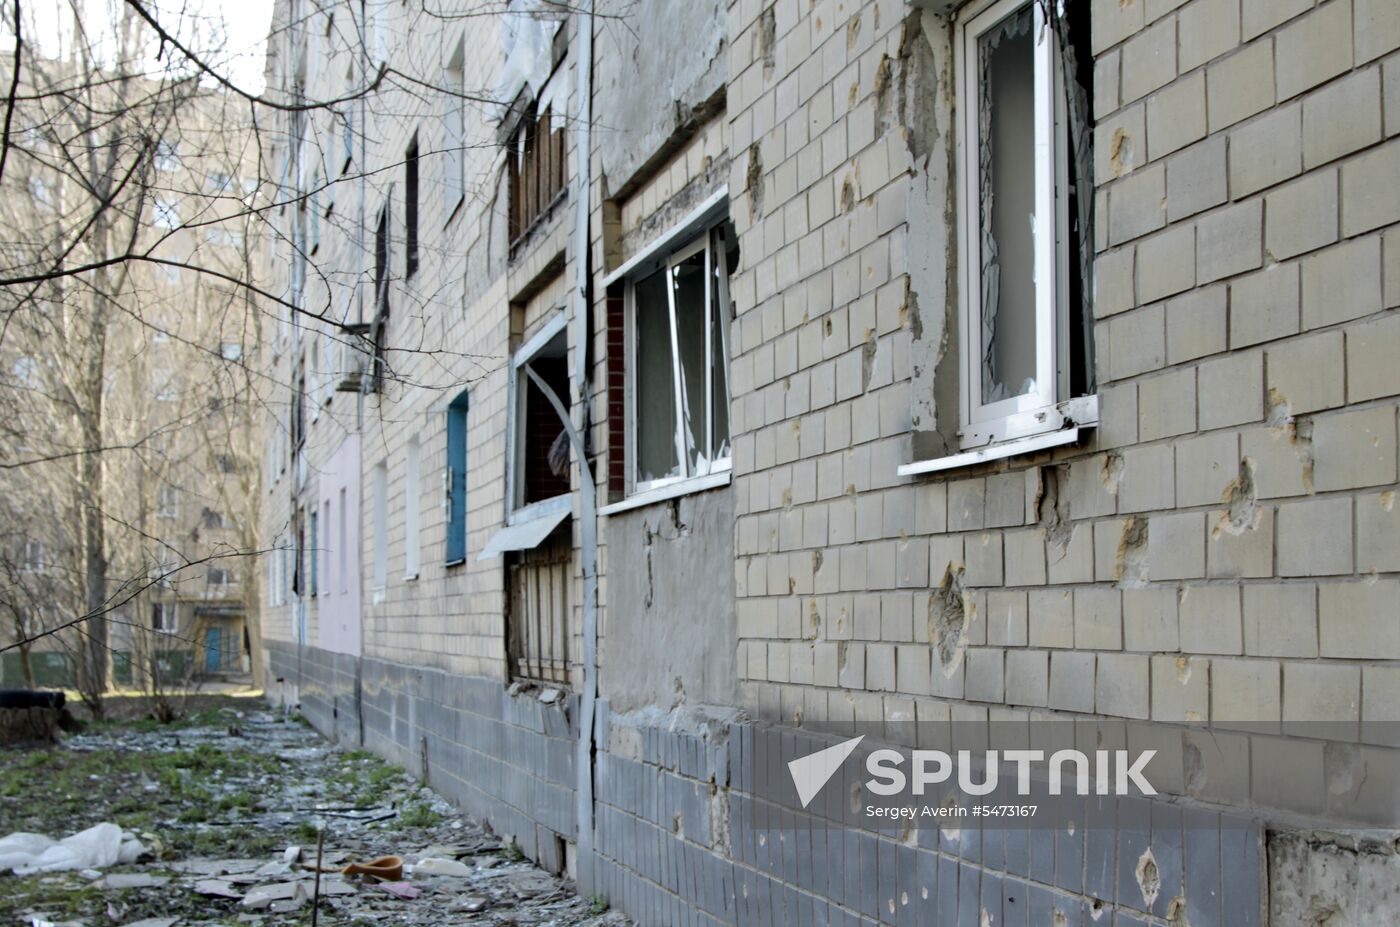 Aftermath of night shelling in Donetsk